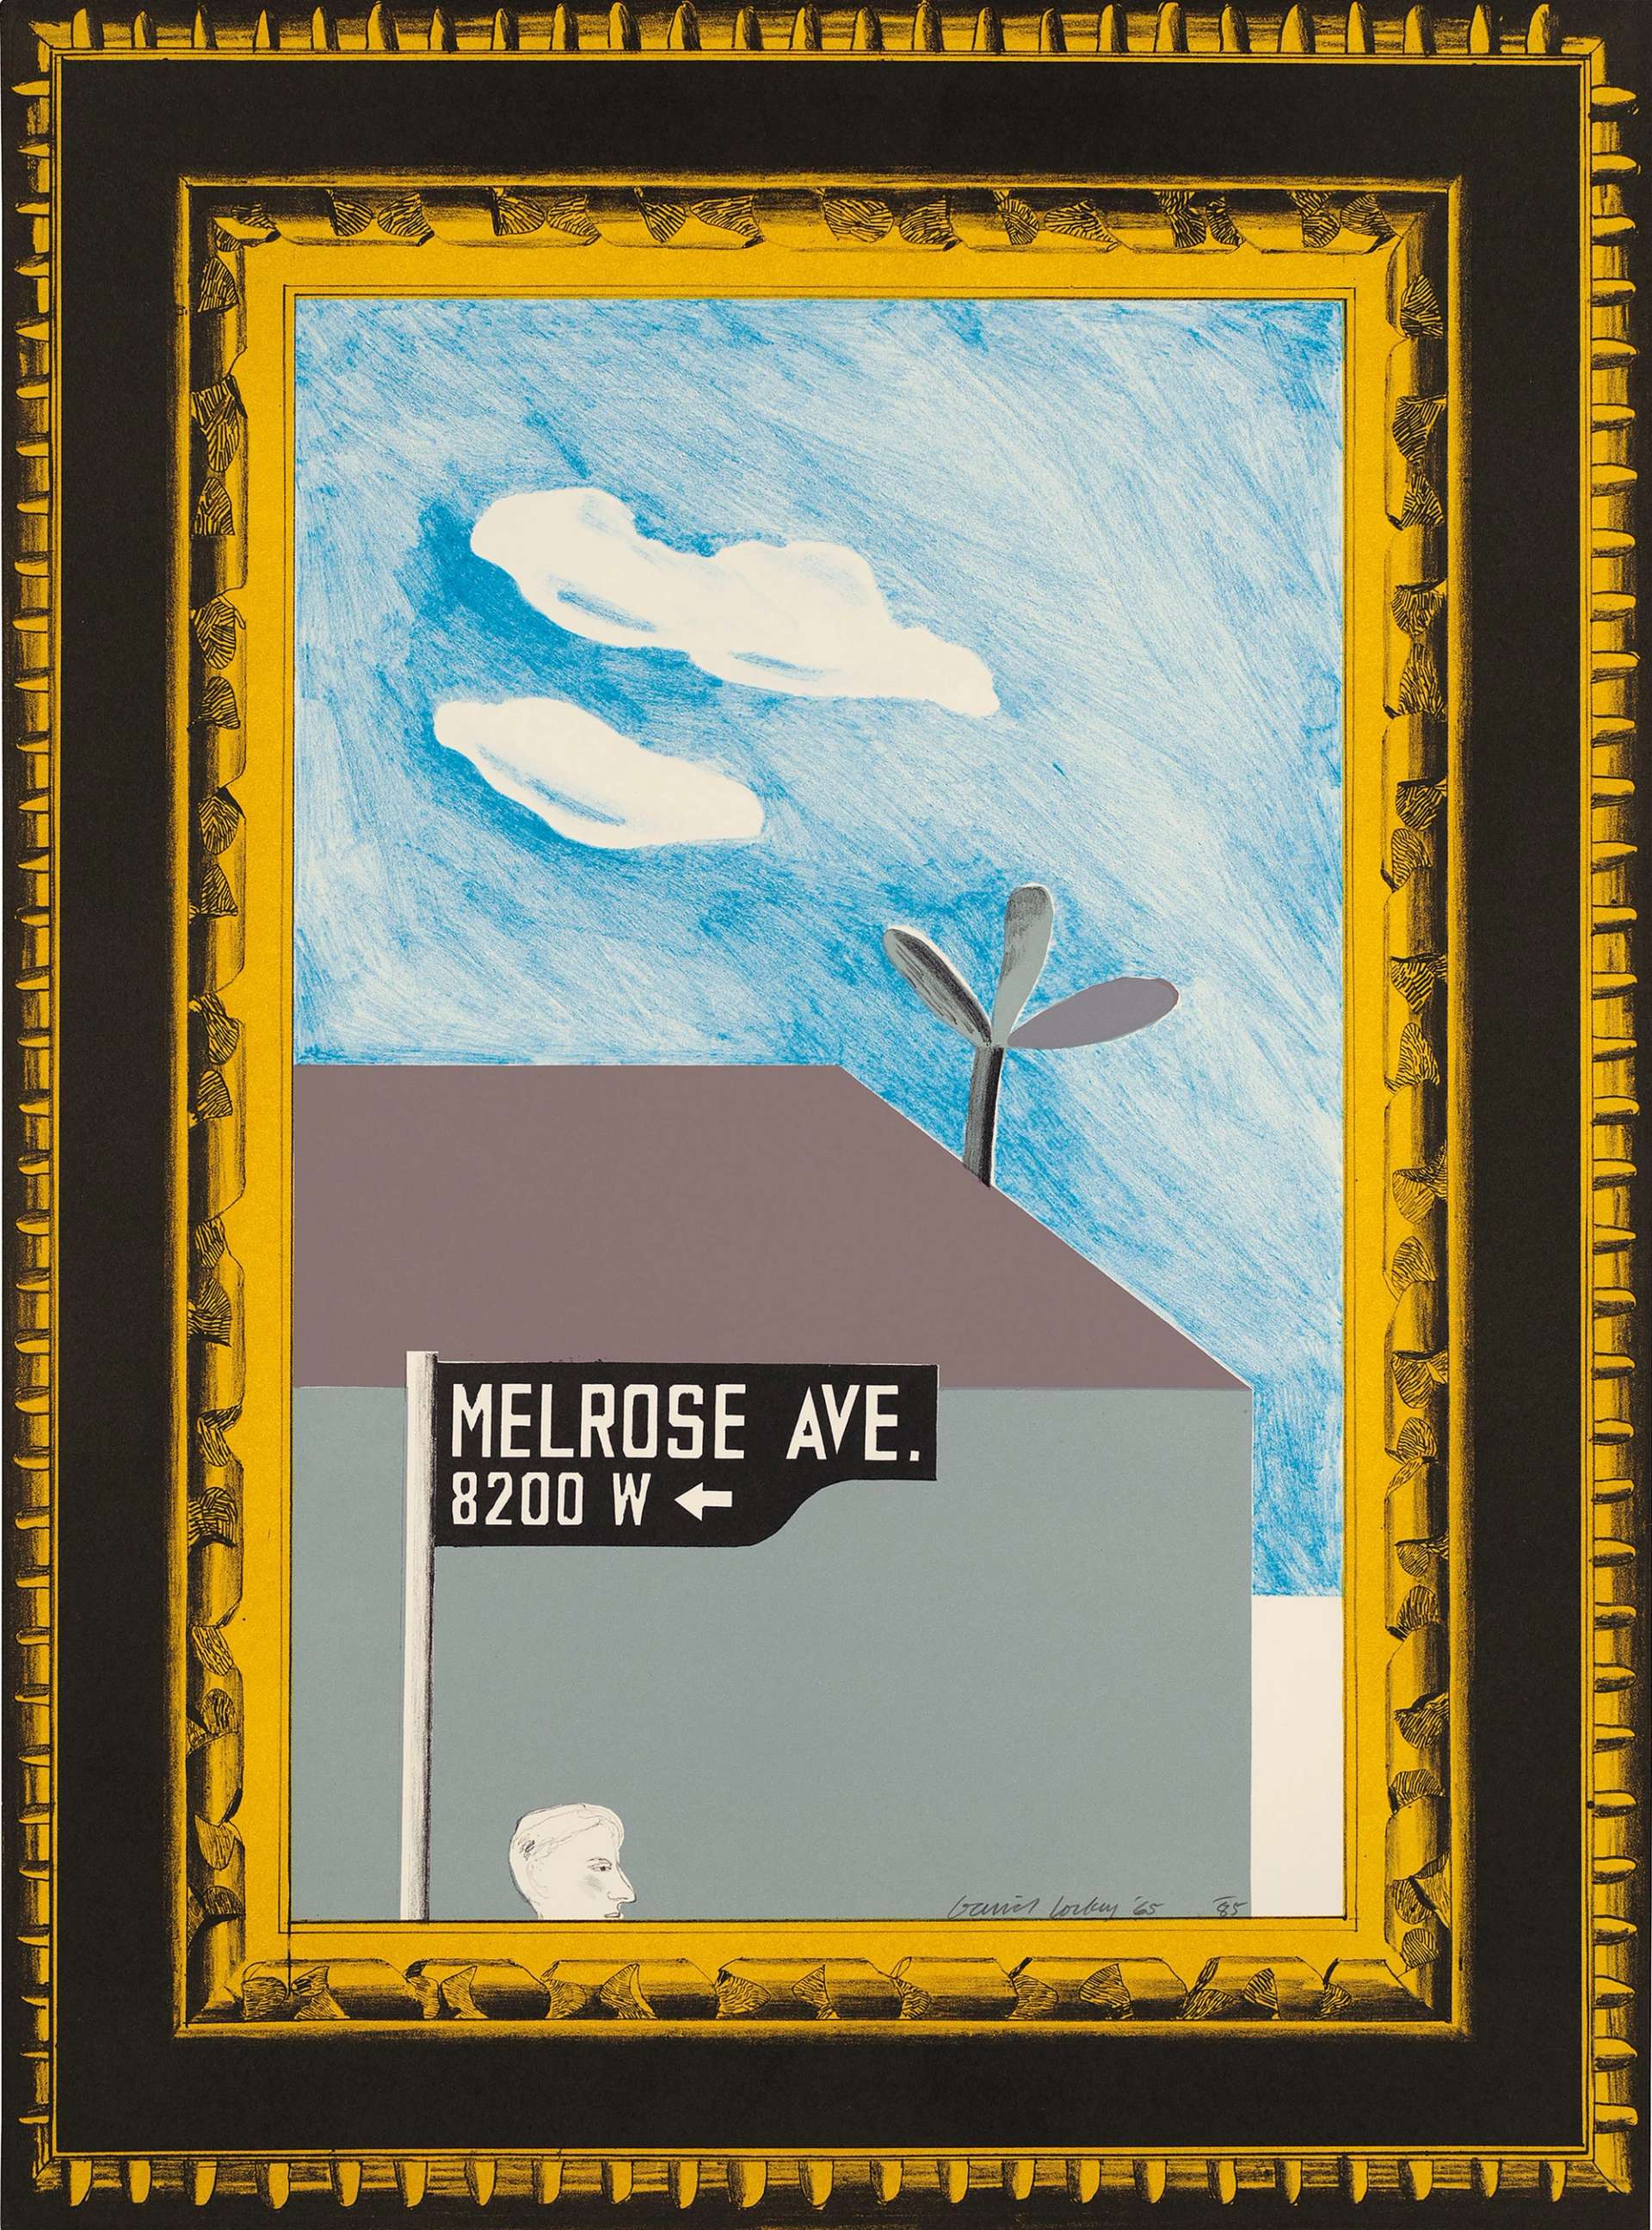 David Hockney’s Picture Of Melrose Avenue In An Ornate Gold Frame. A lithograph of a sign “MELROSE AVE. 8200 W” with the head of a man underneath it in front of a house with a cloudy blue sky. 